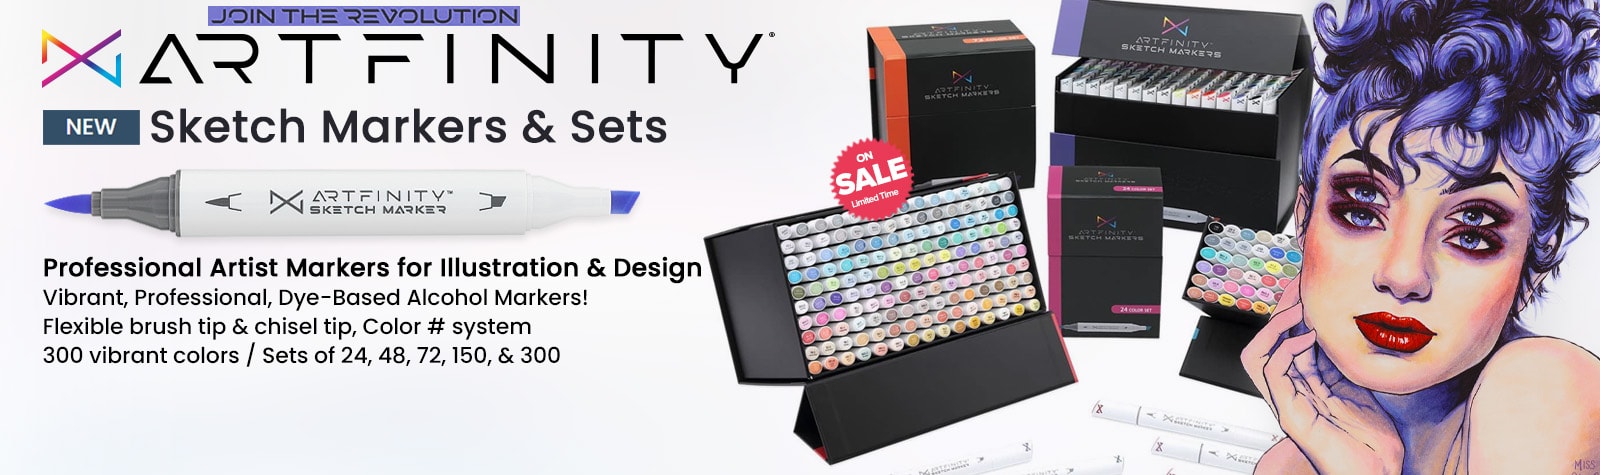 Artfinity Sketch Markers and Sets